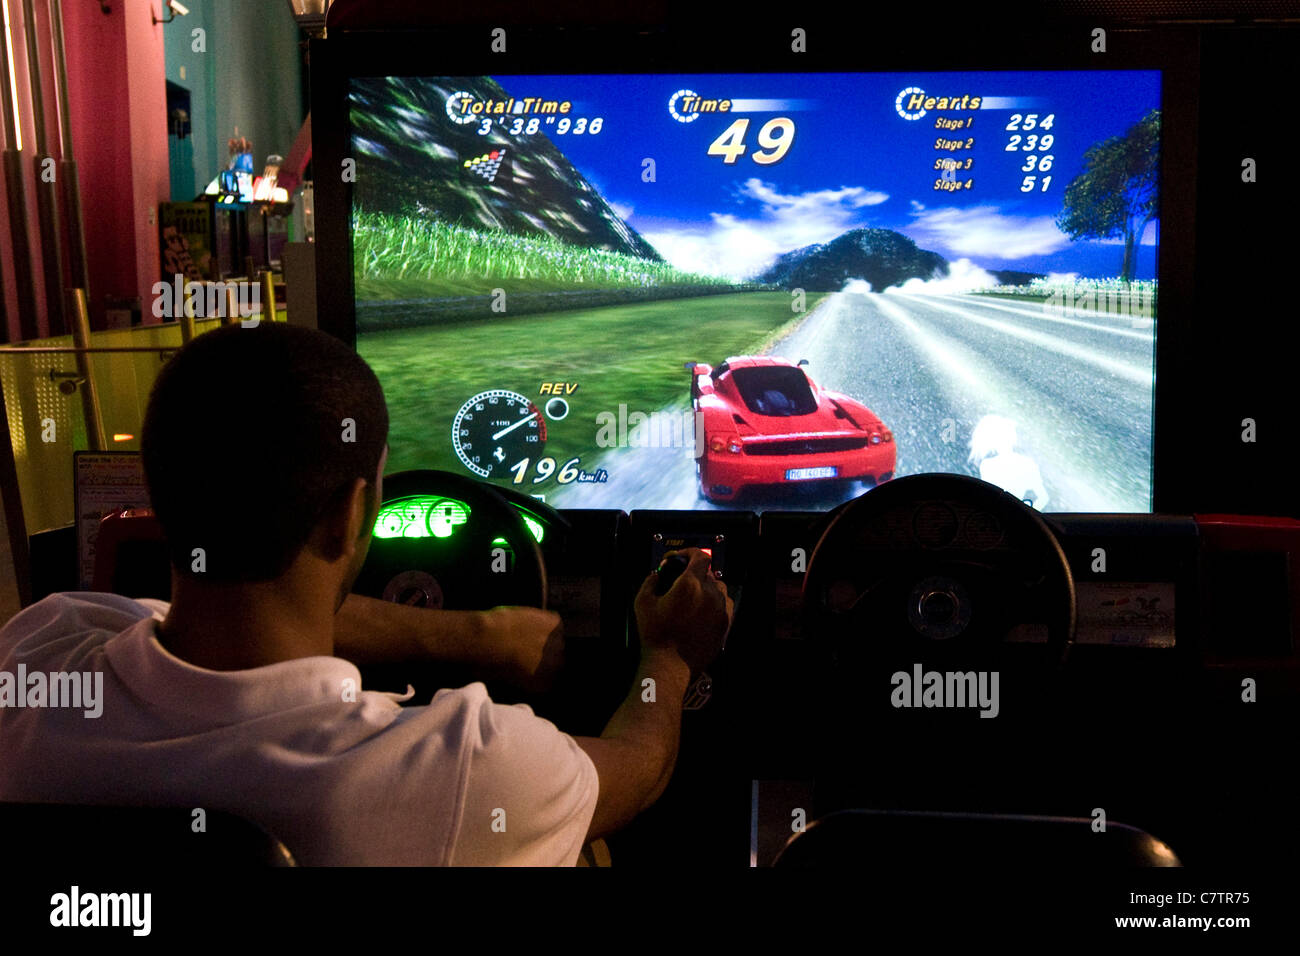 Man playing with videogame in arcade Stock Photo